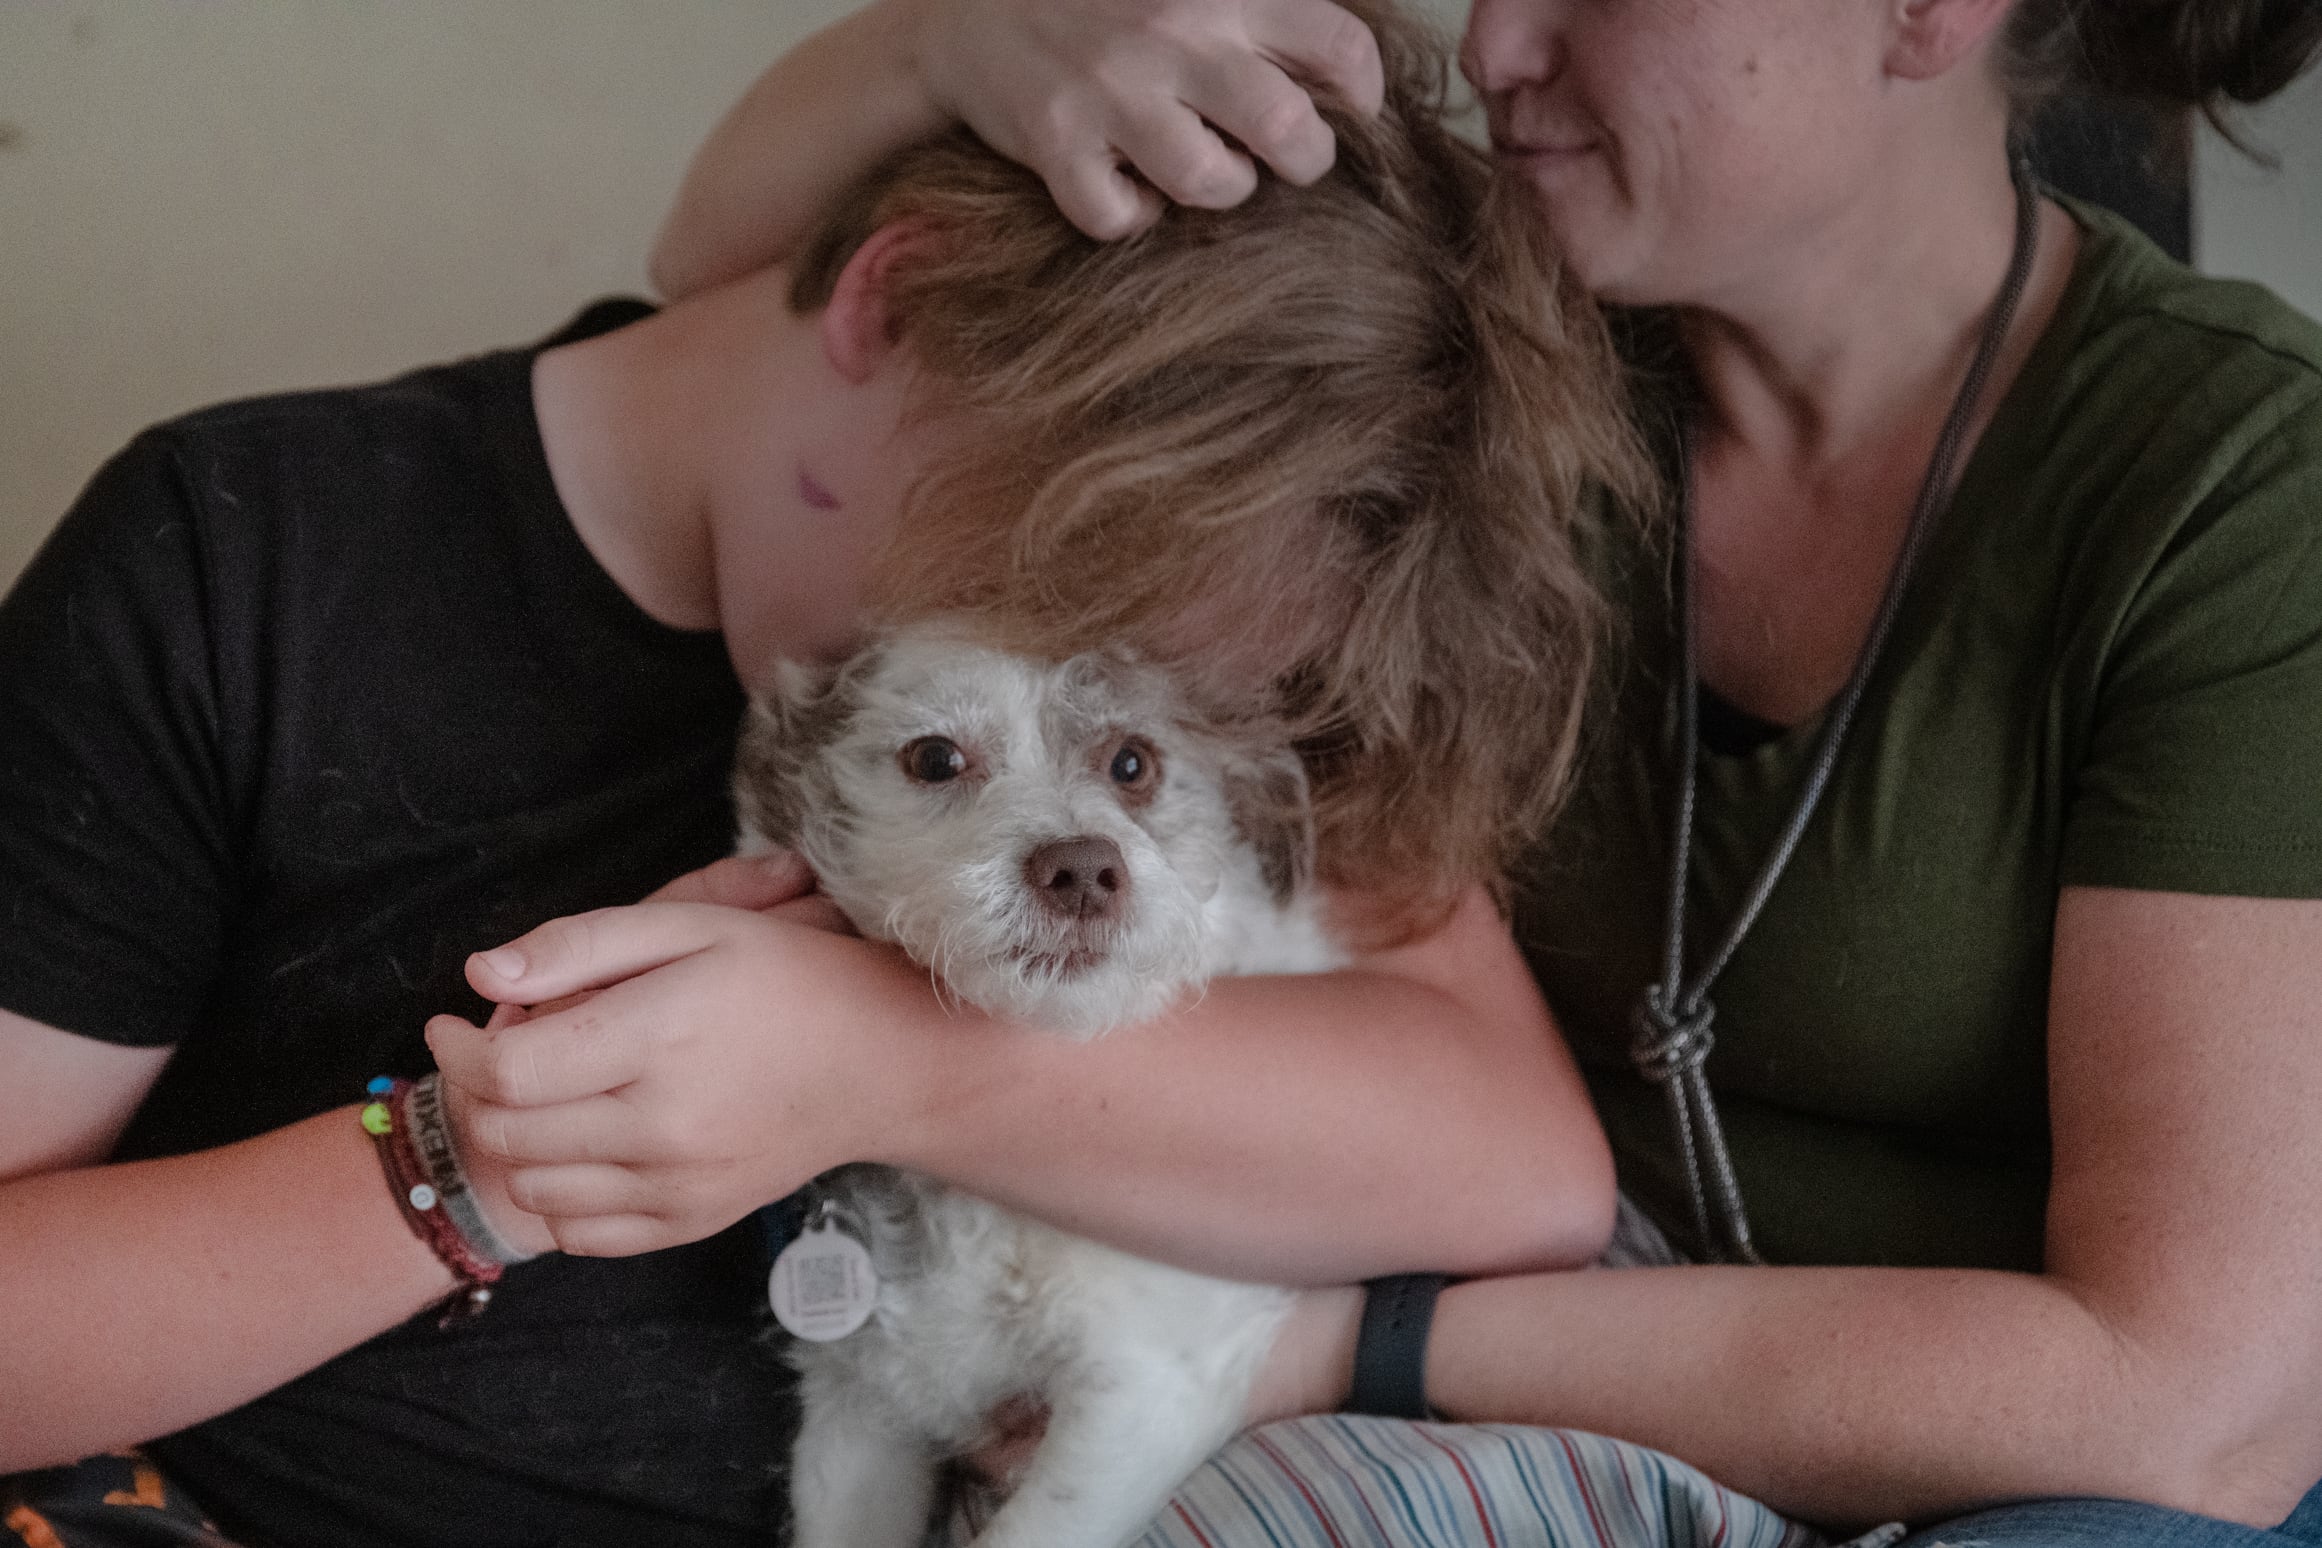 A woman hugs her 13-year-old son’s head. Her face and his face are obscured. The boy is hugging a small white dog.